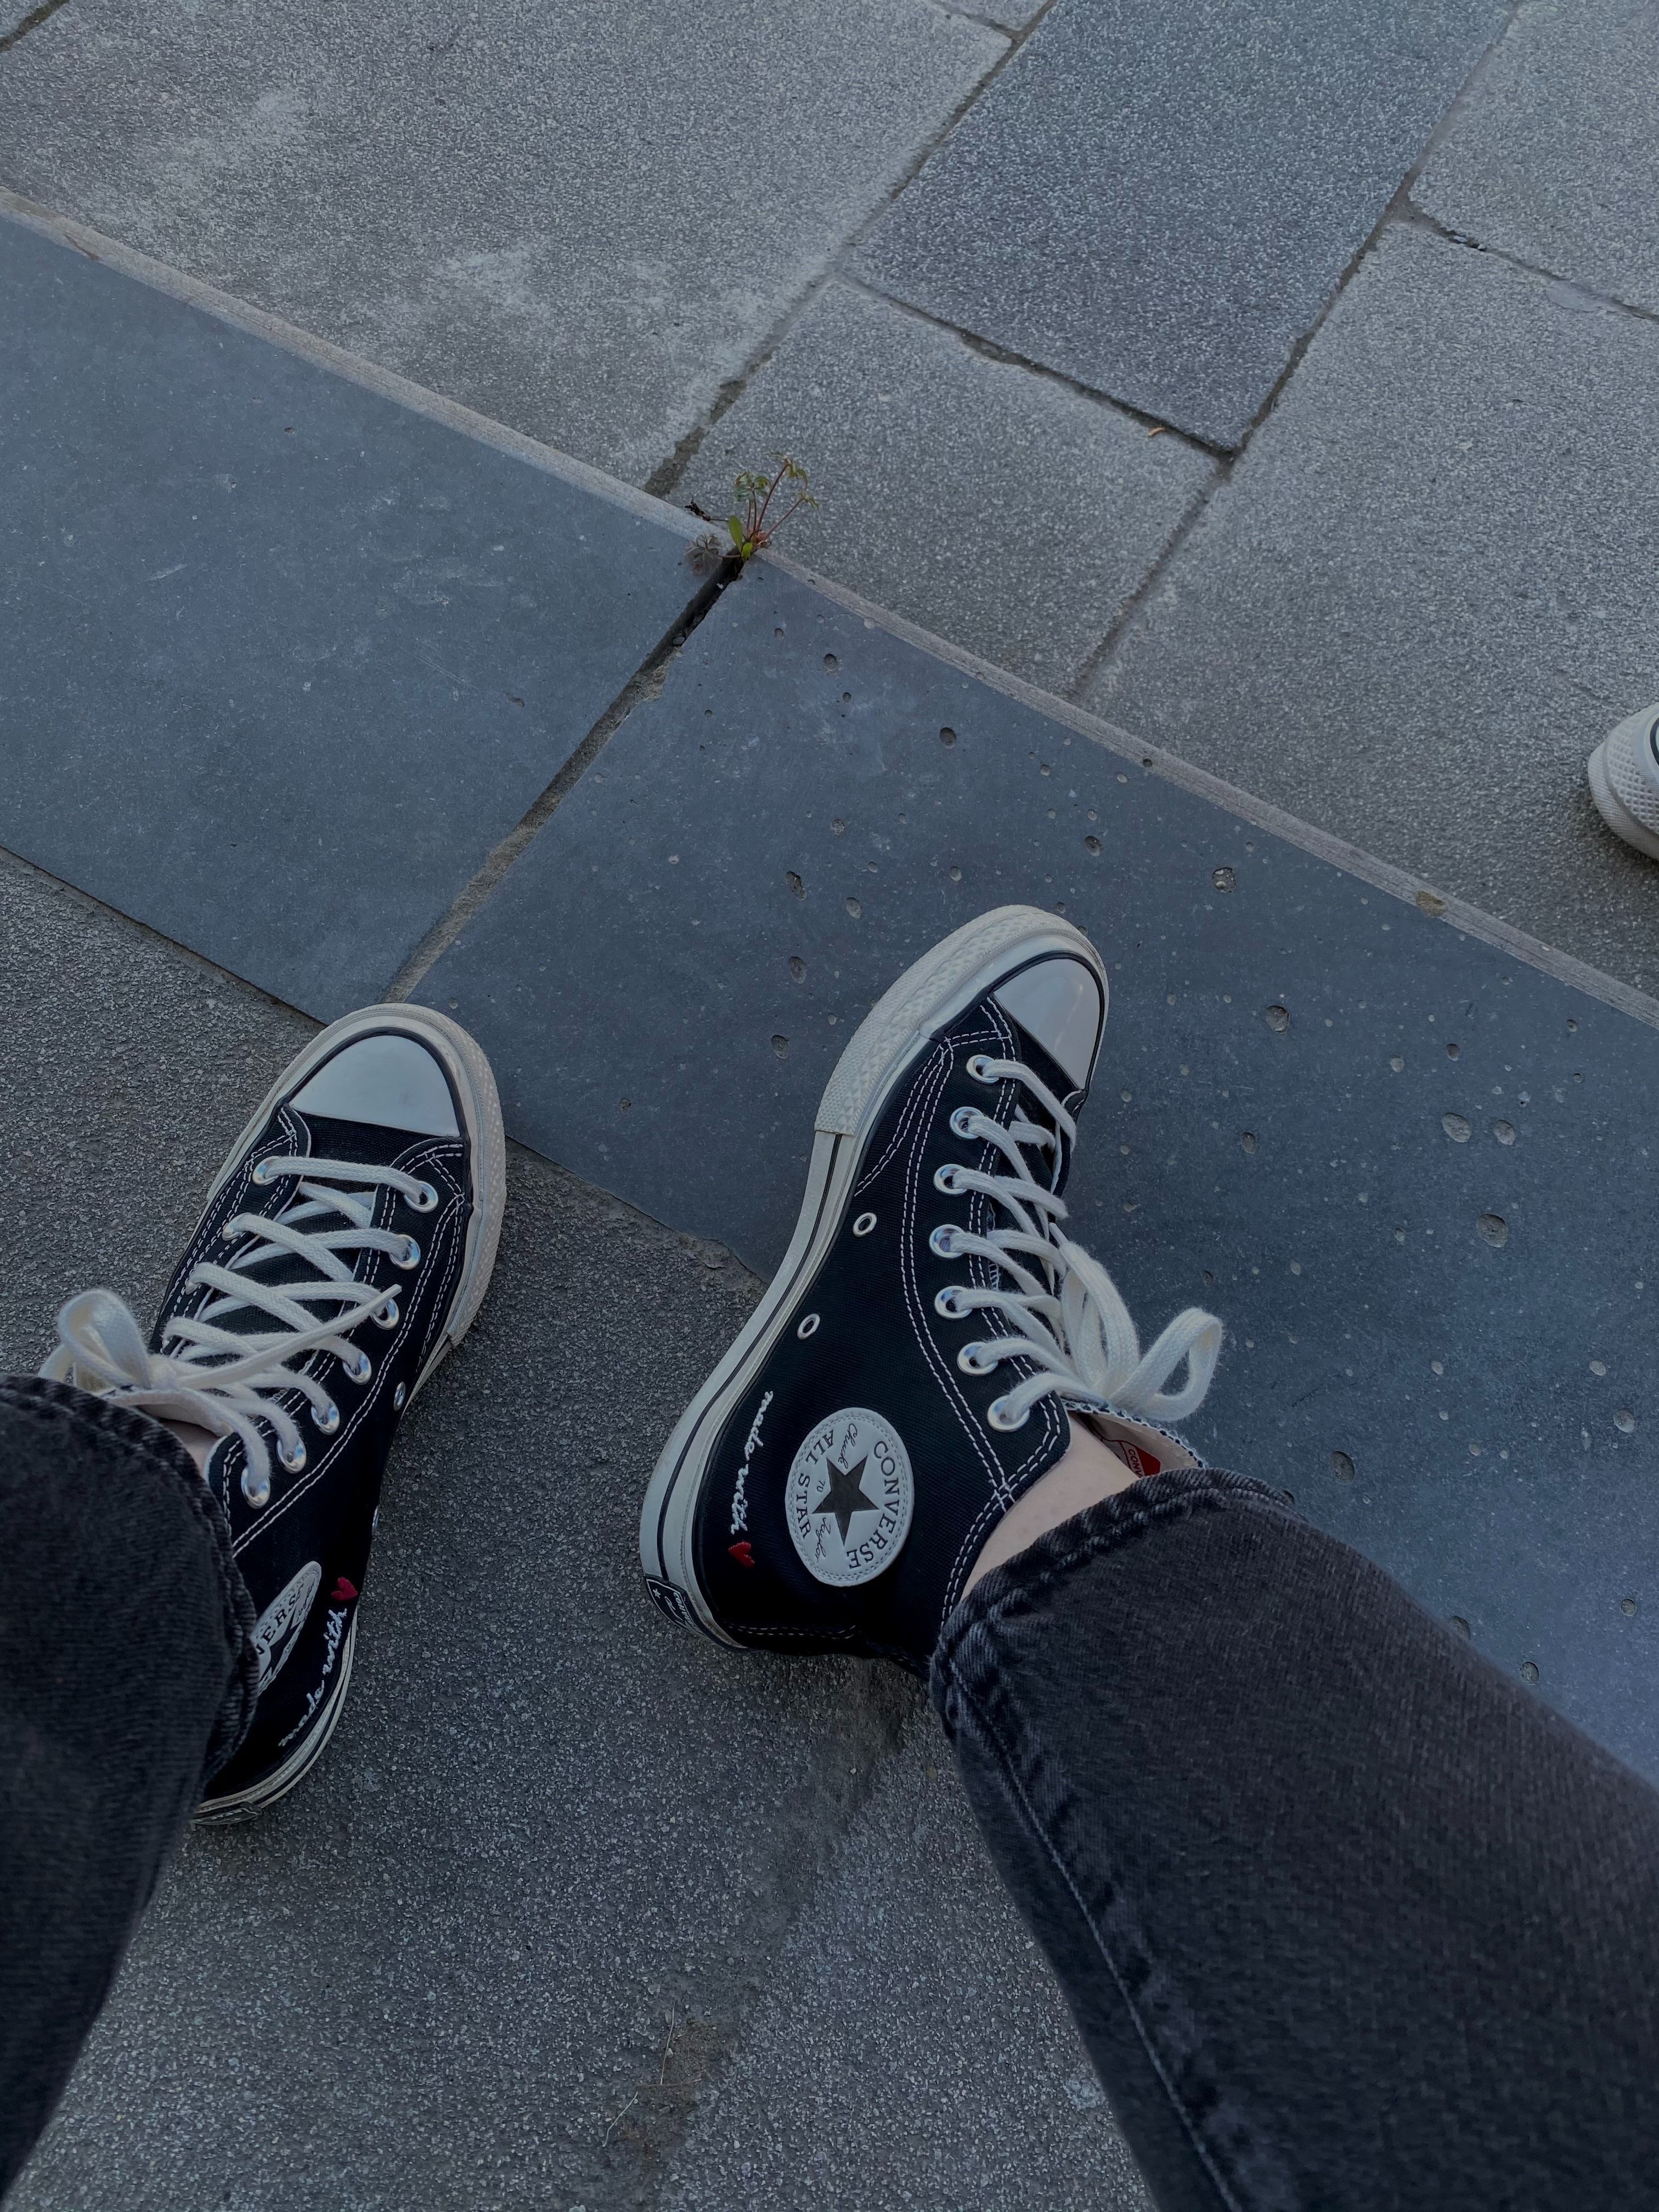 A person wearing black and white sneakers - Shoes, Converse